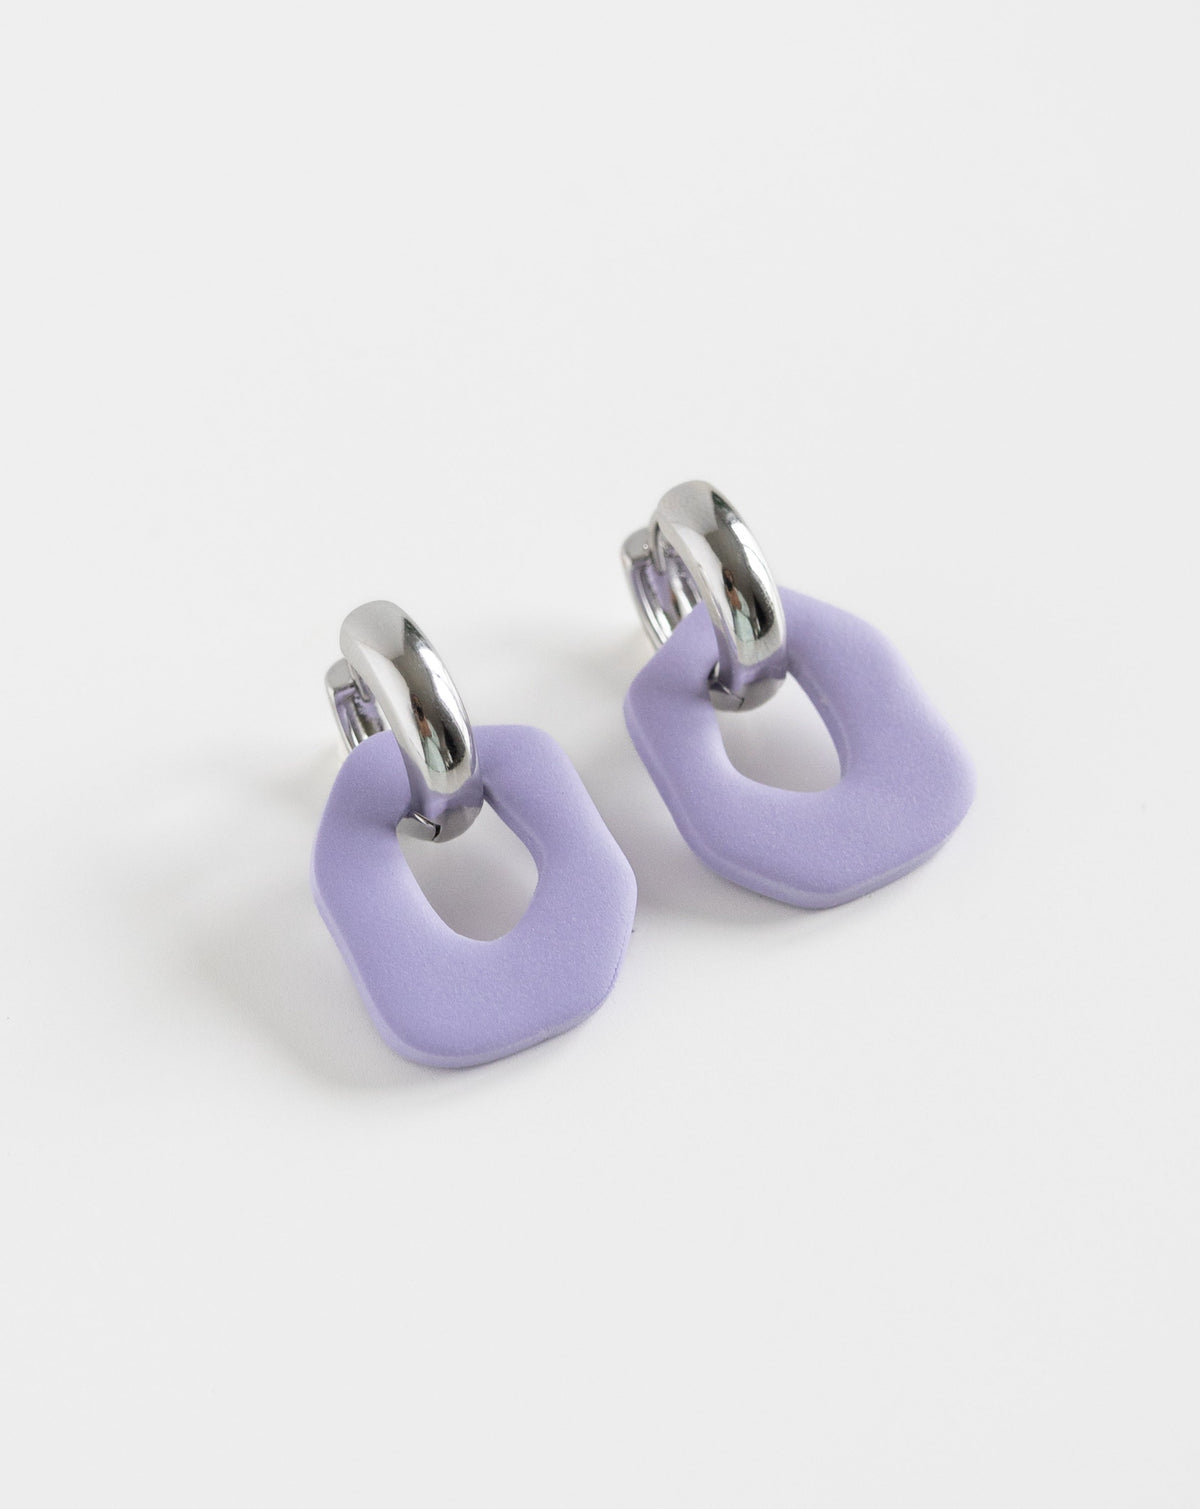 Darien earrings in Lilac color with silver hoops, side view